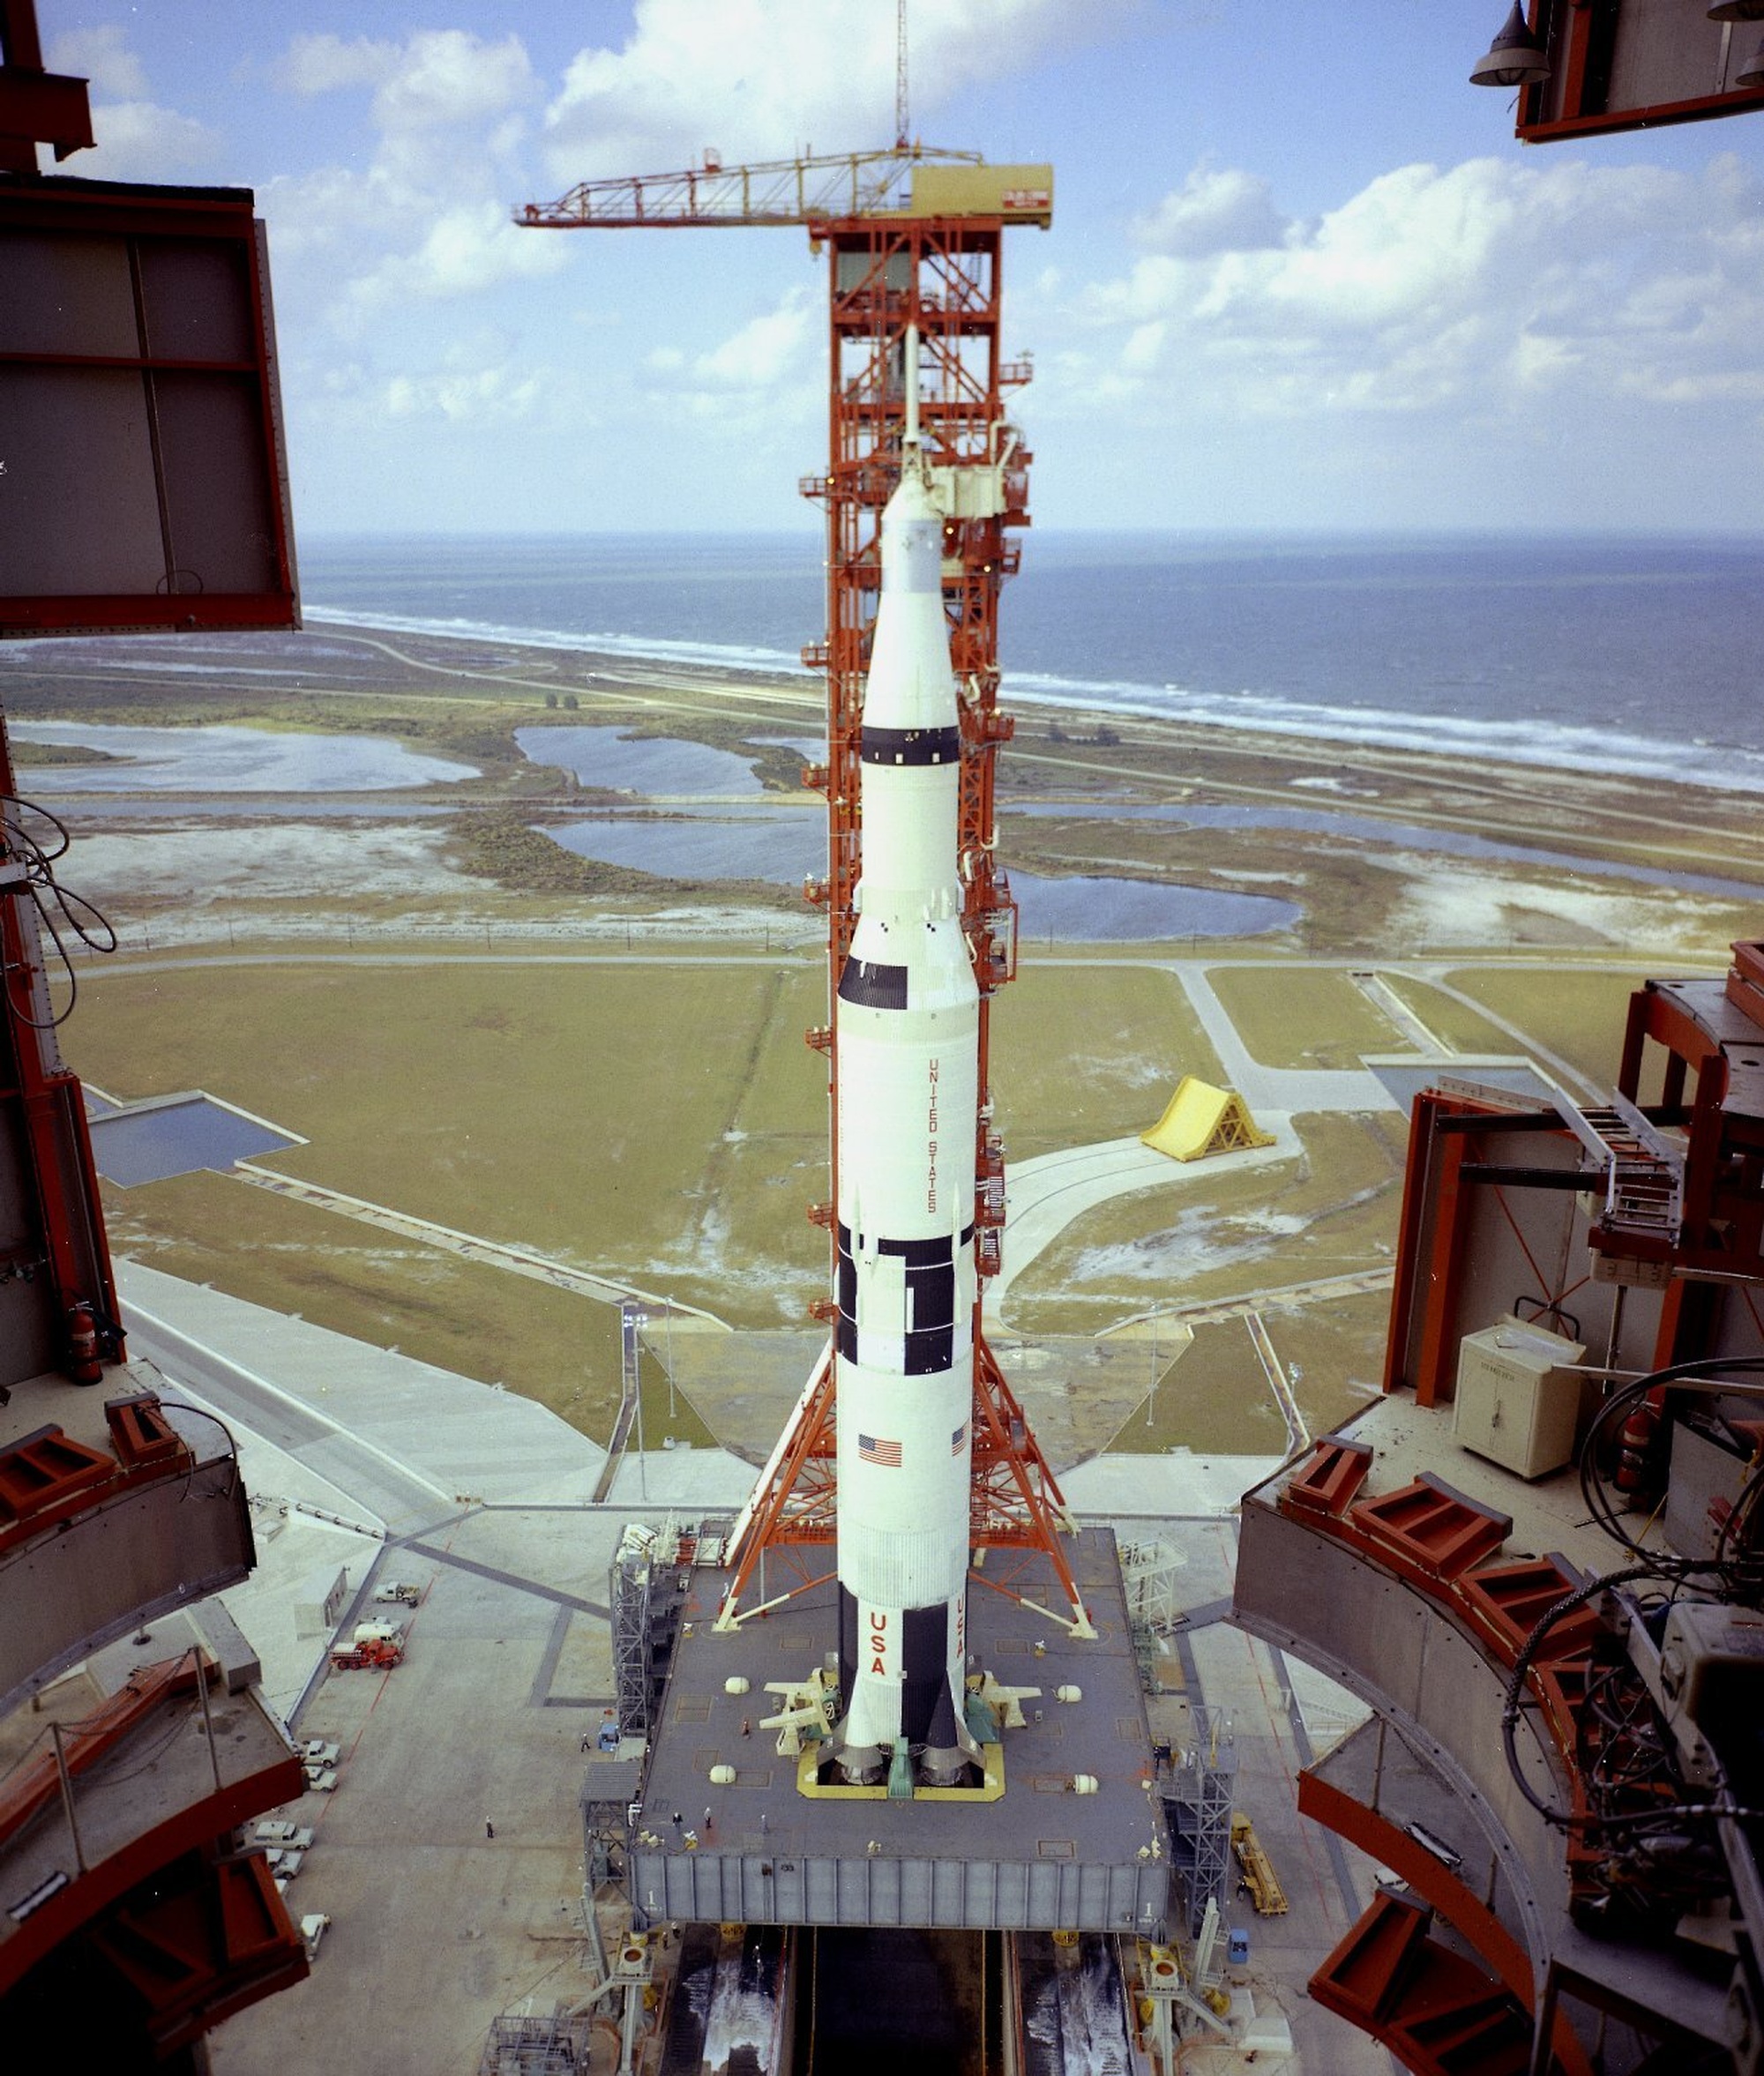 DVIDS - Images - Saturn V Vehicle for Apollo 4 at the Launch Complex 39A at the Kennedy Space Center